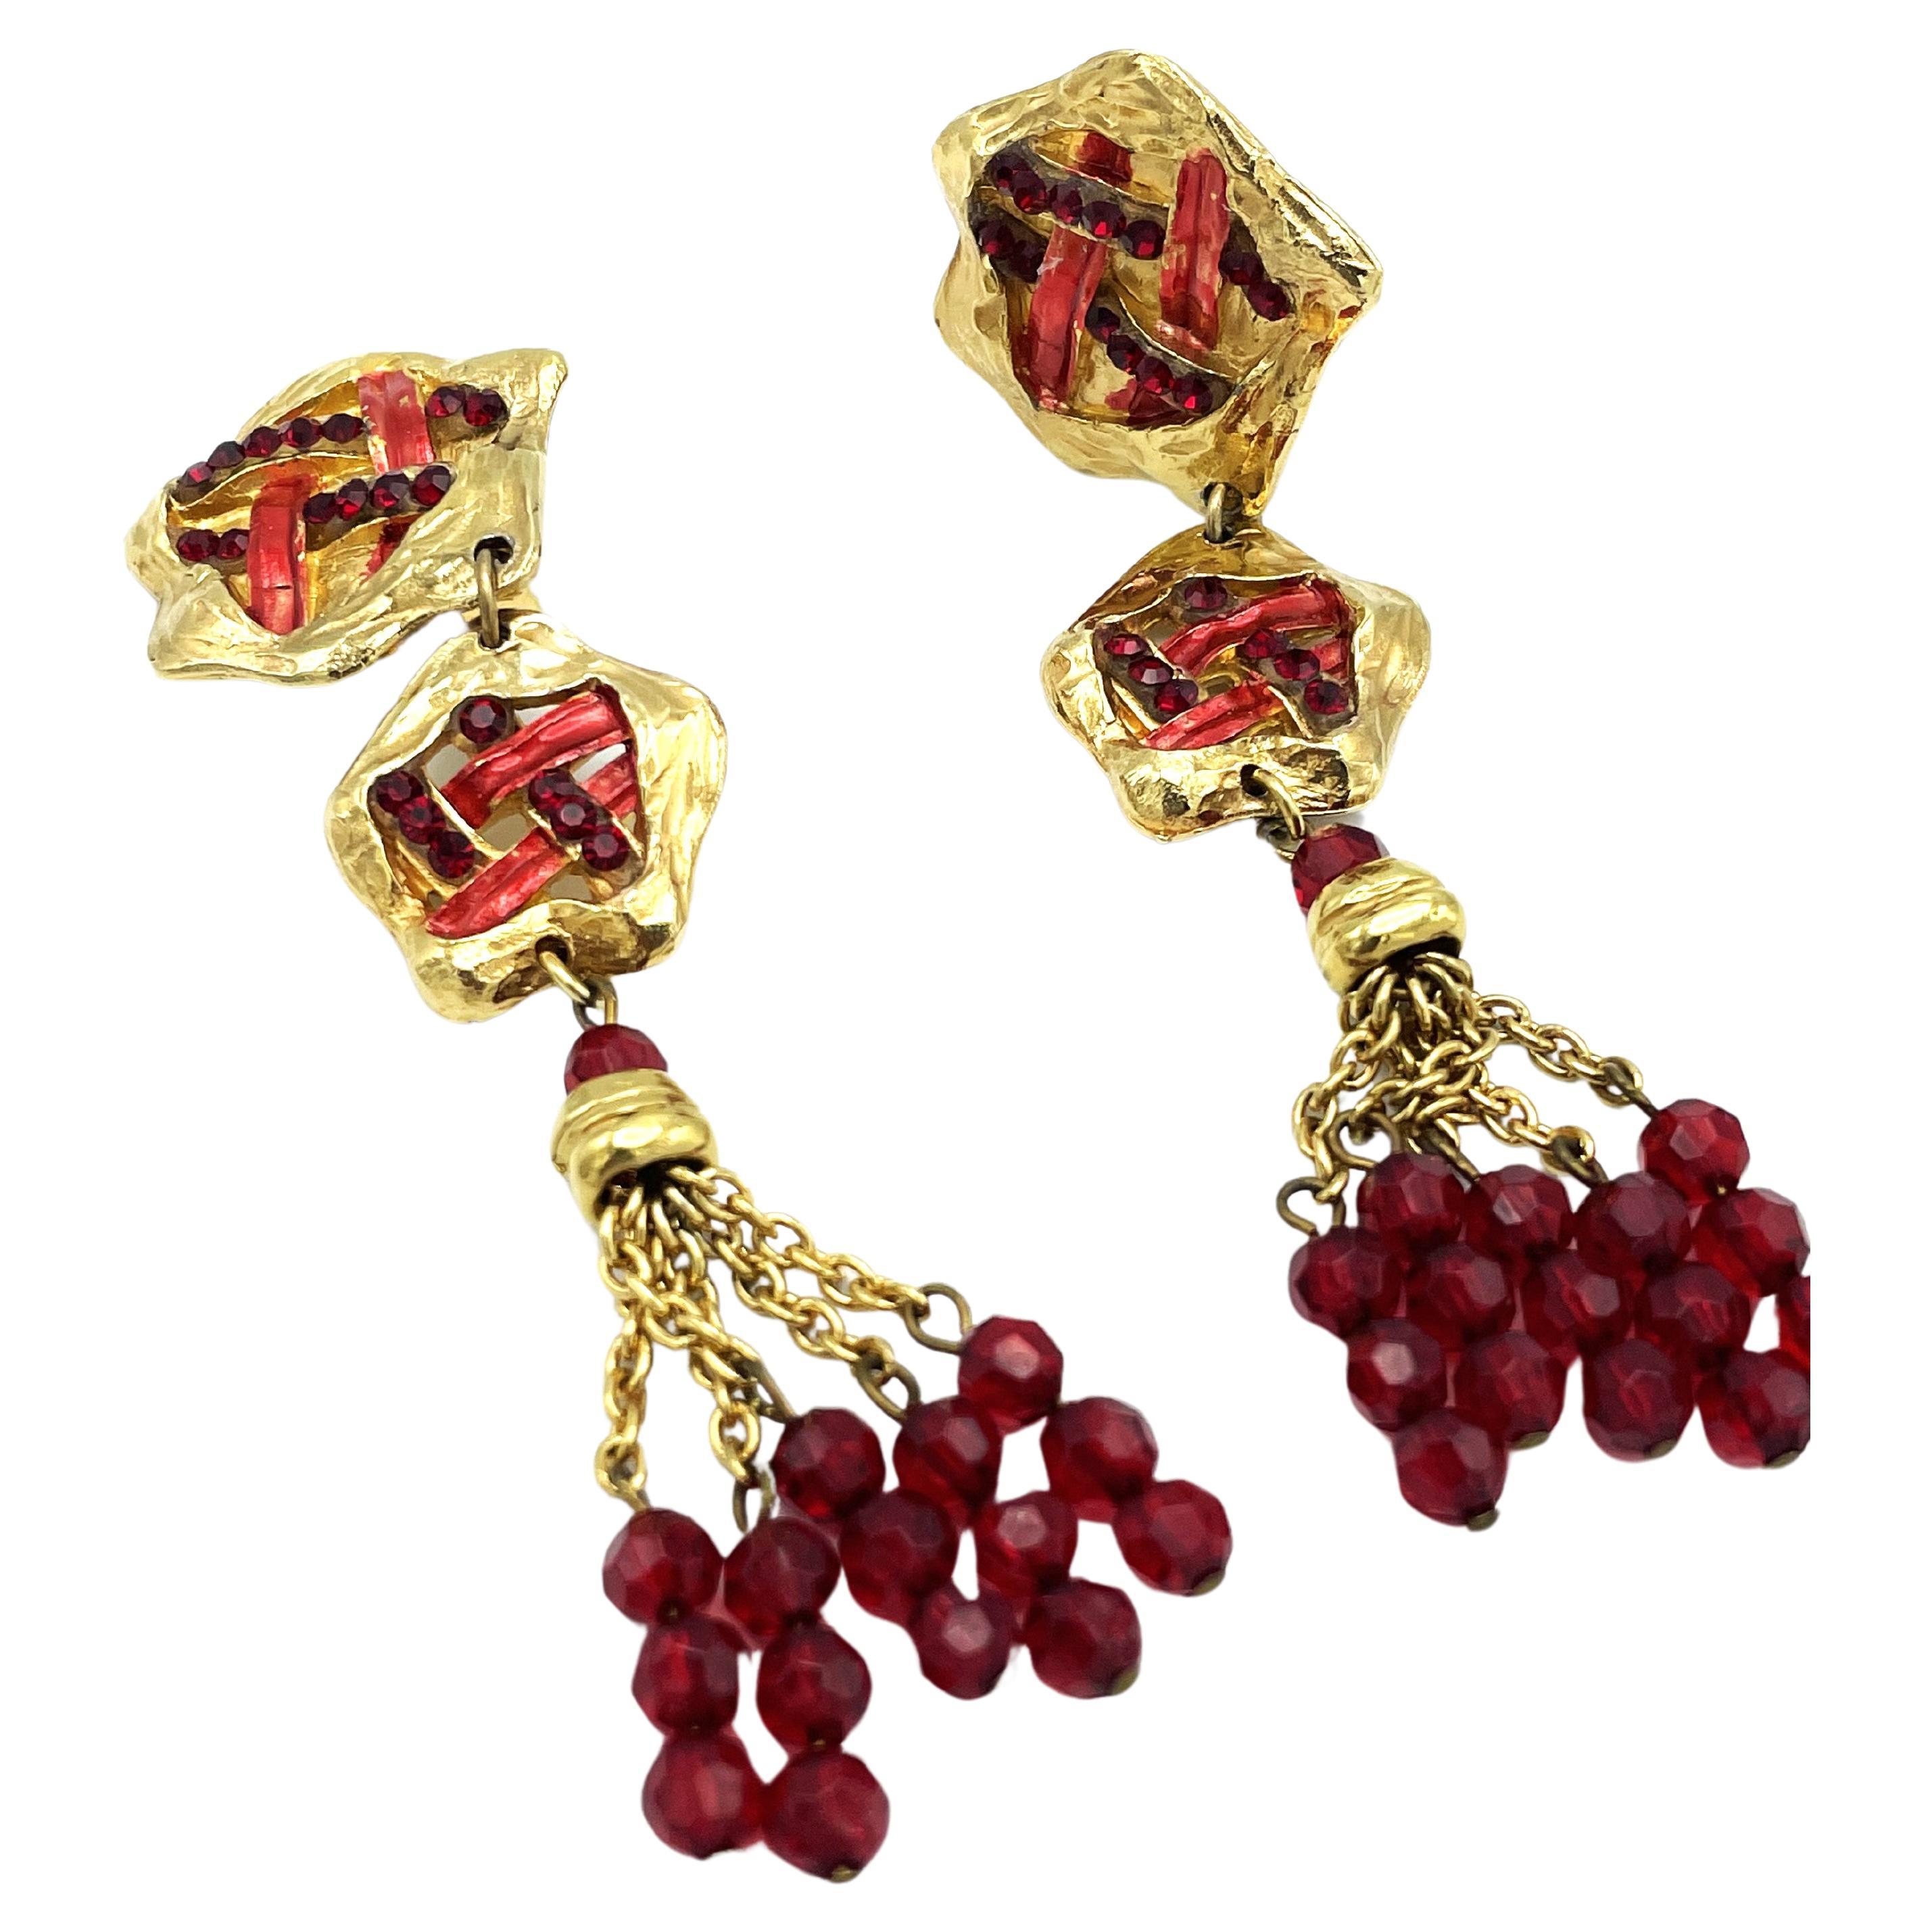 Long Clip-one earing by JACKY de G Paris, gold plated, red rhinestons